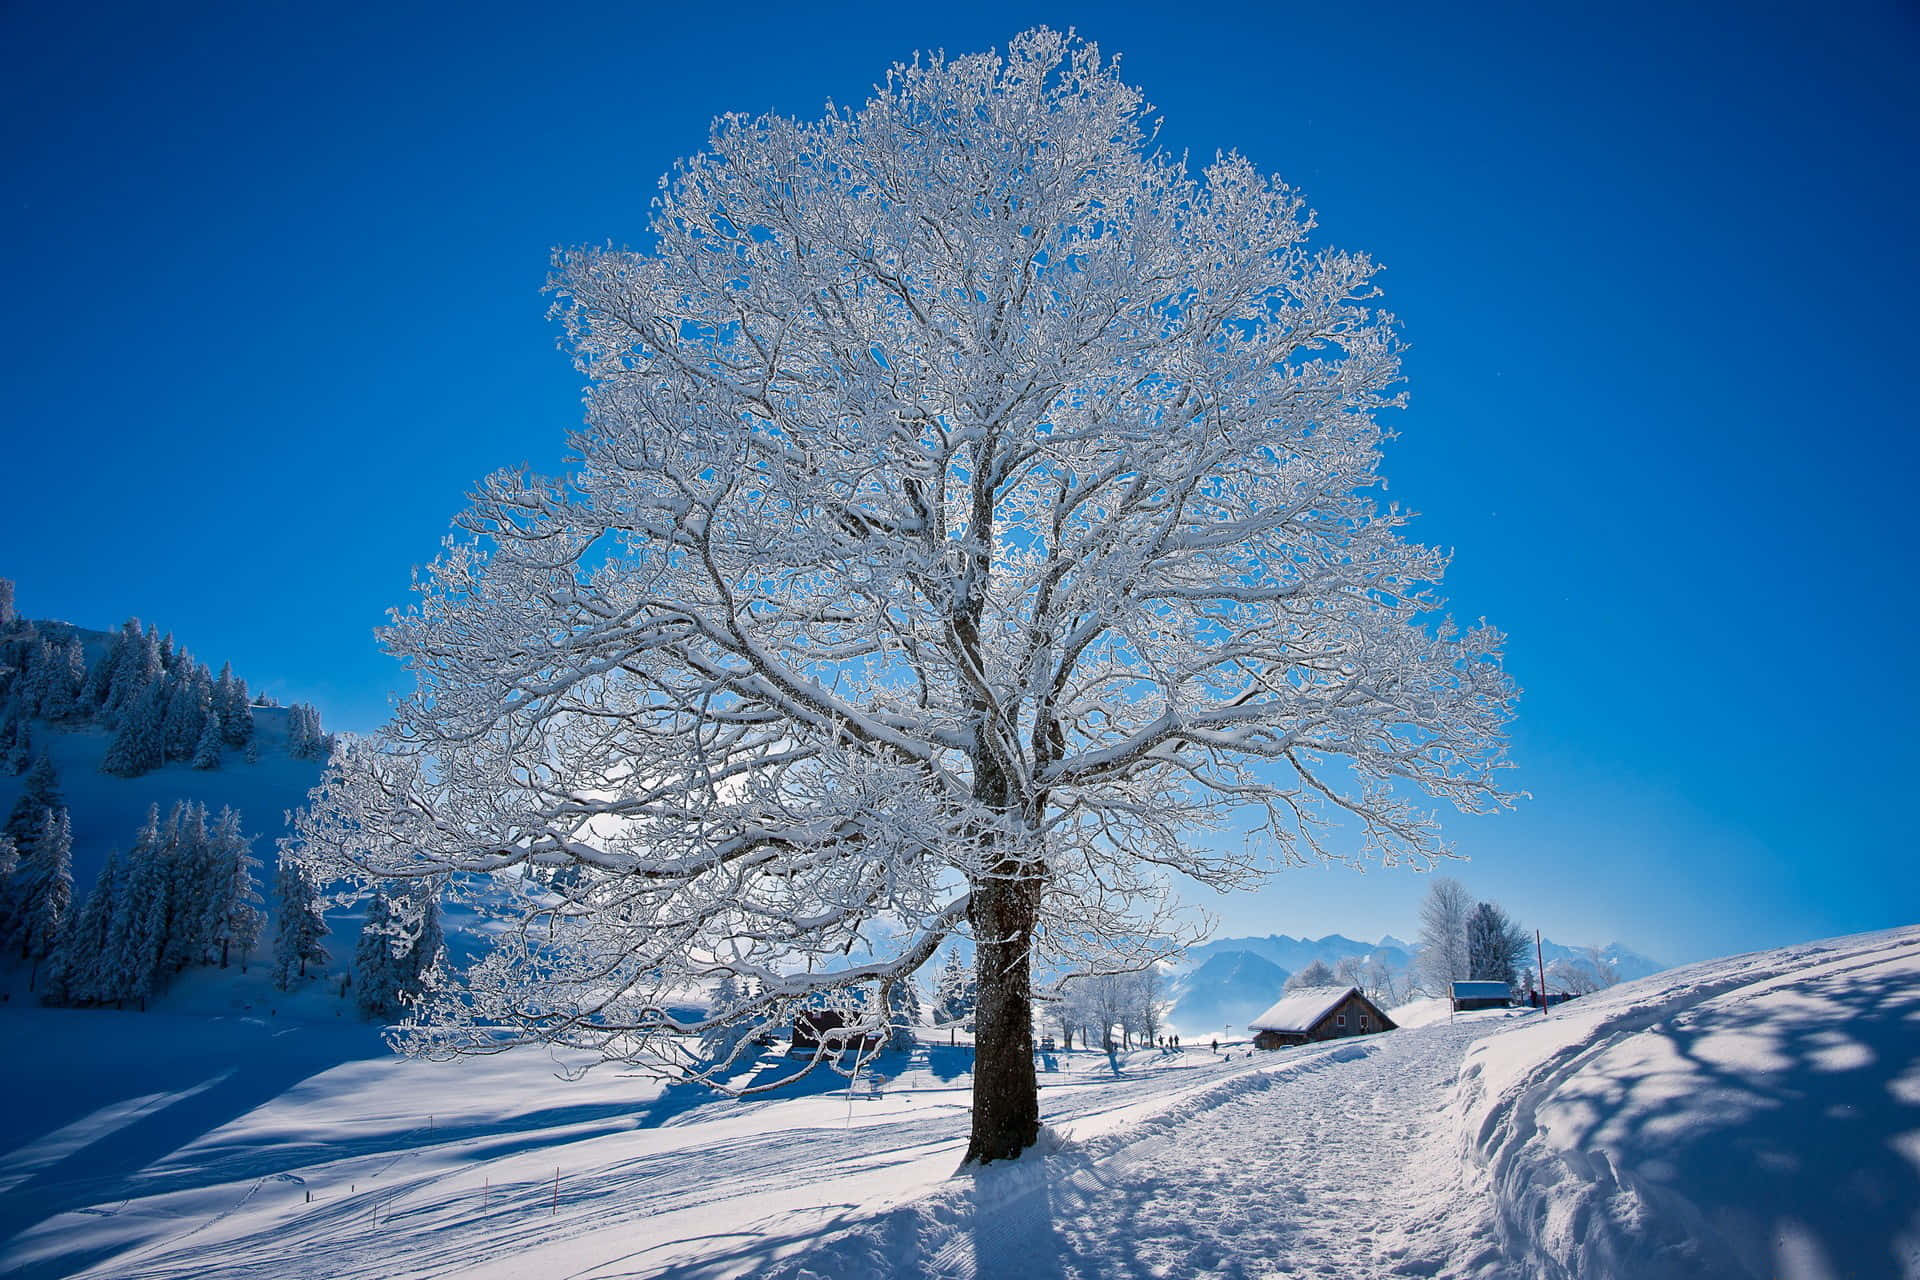 "Enjoy the beauty of winter with this stunning landscape"